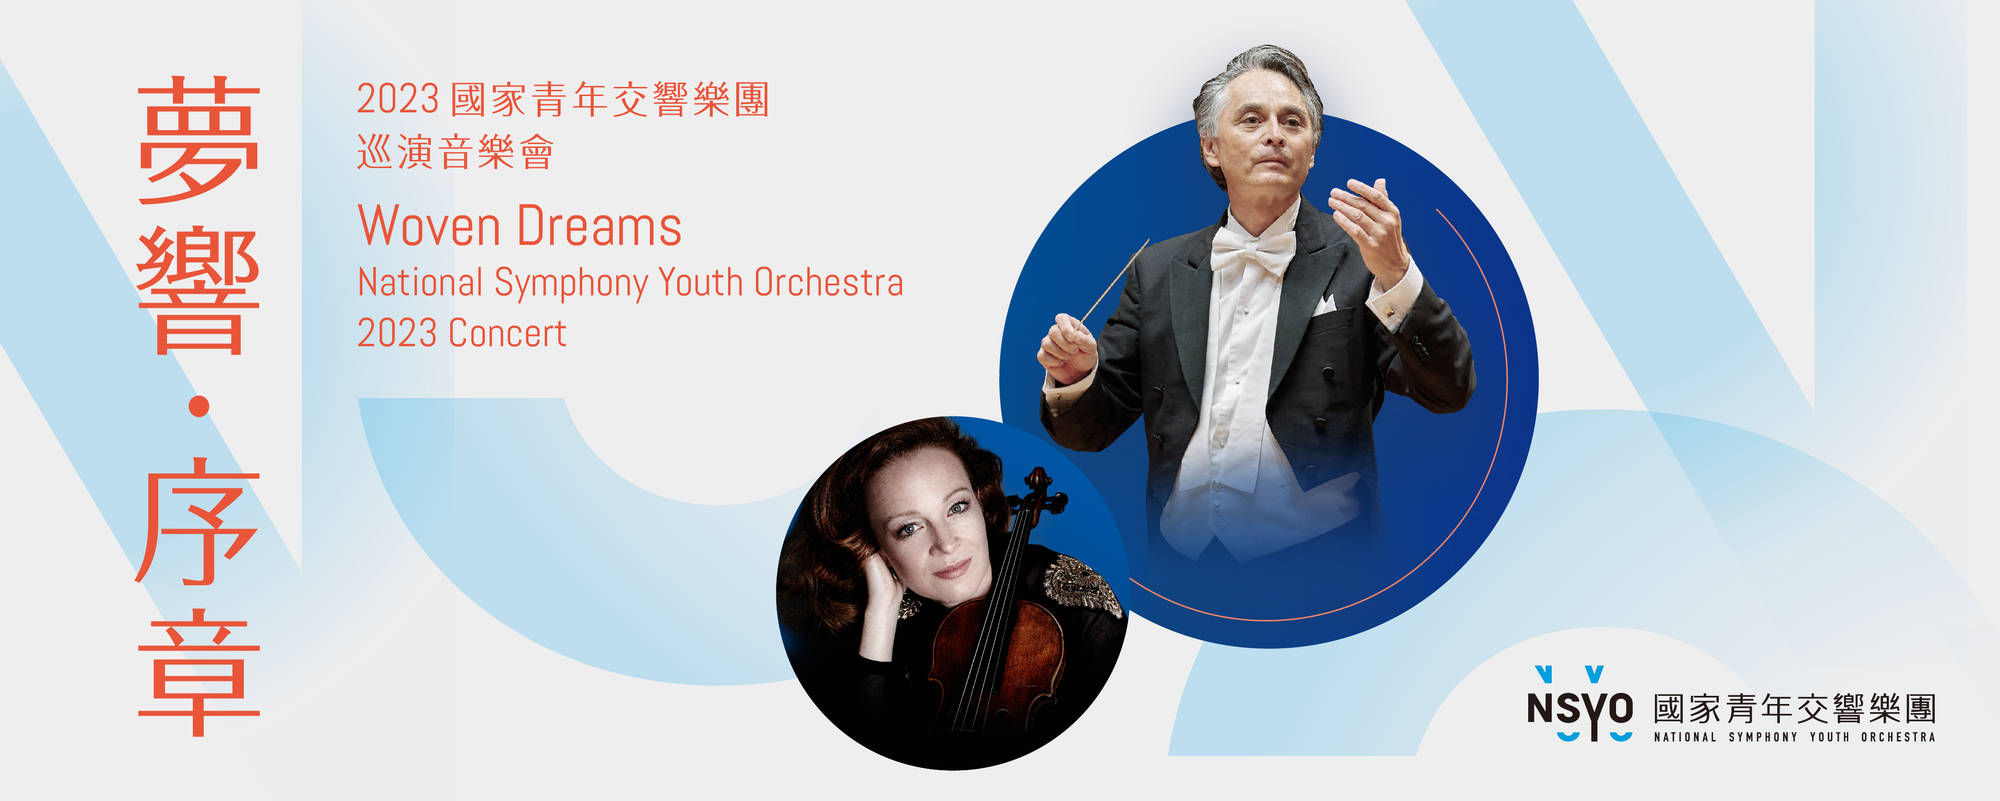 Woven Dreams - National Symphony Youth Orchestra 2023 Concert